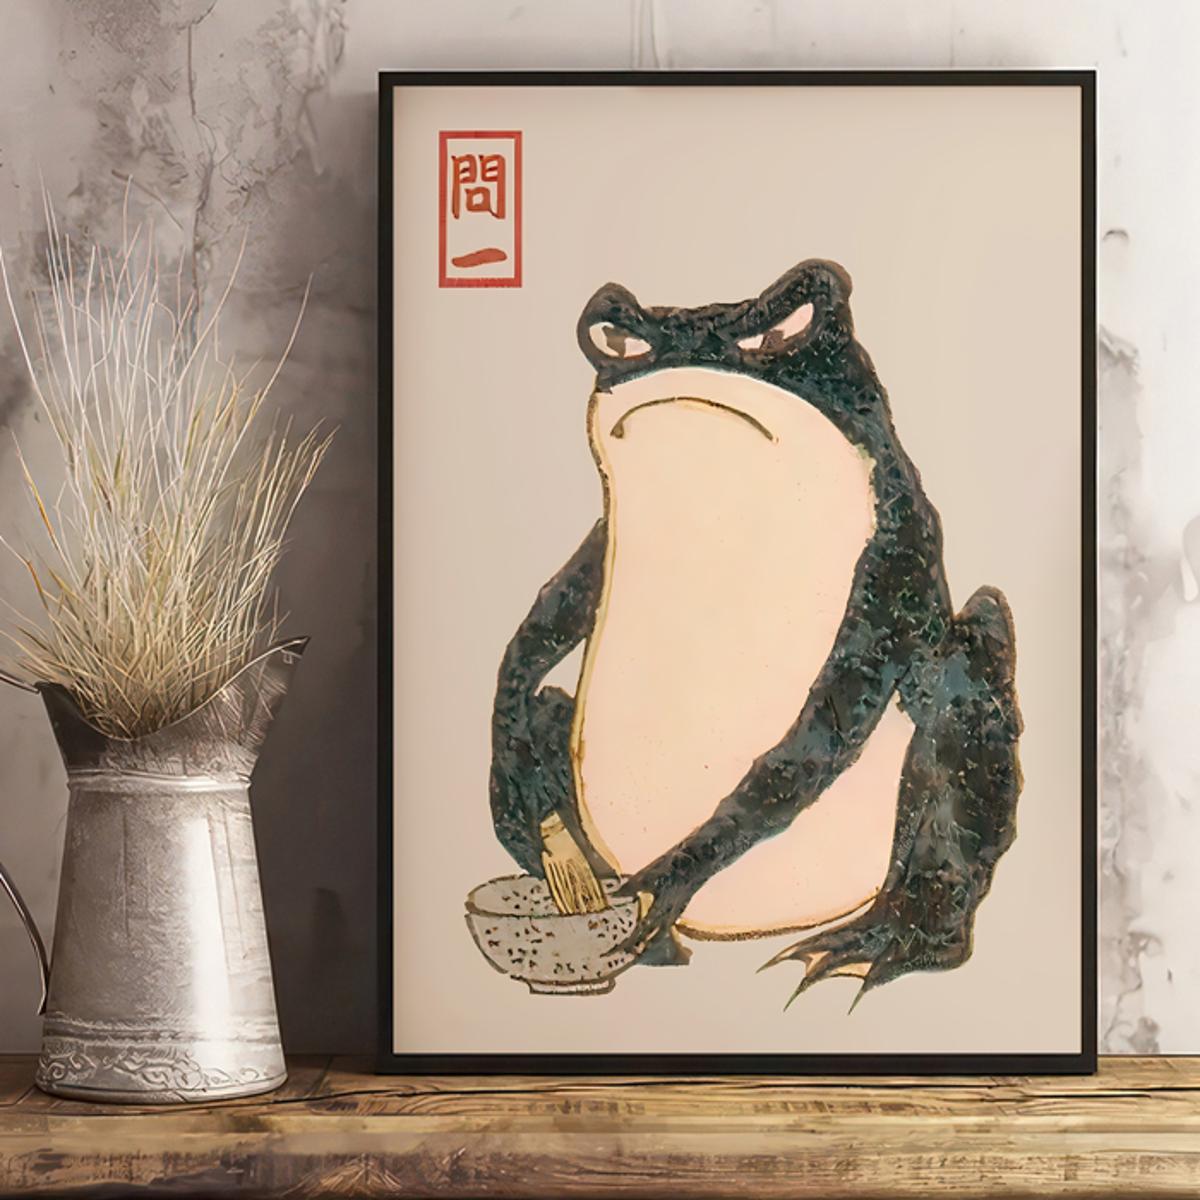 11.81*15.75inch Thickened Canvas Painting, Upgrade Roll Packaging,  Waterproof Anti-light Anti-oxidation, Japanese Poster, Frog, Fish, Vintage  Art Prin